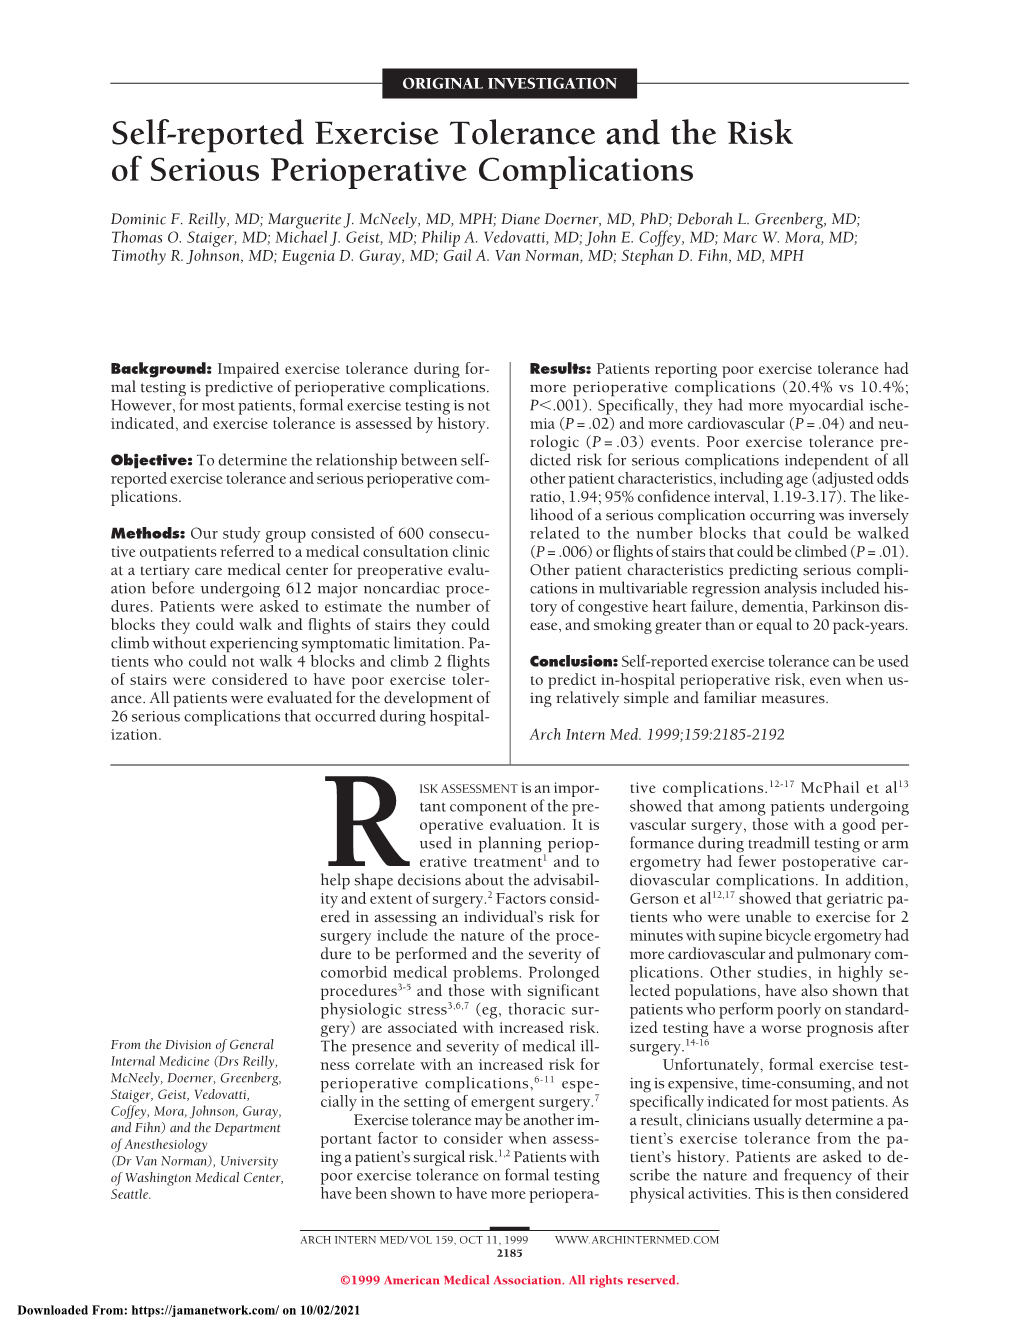 Self-Reported Exercise Tolerance and the Risk of Serious Perioperative Complications